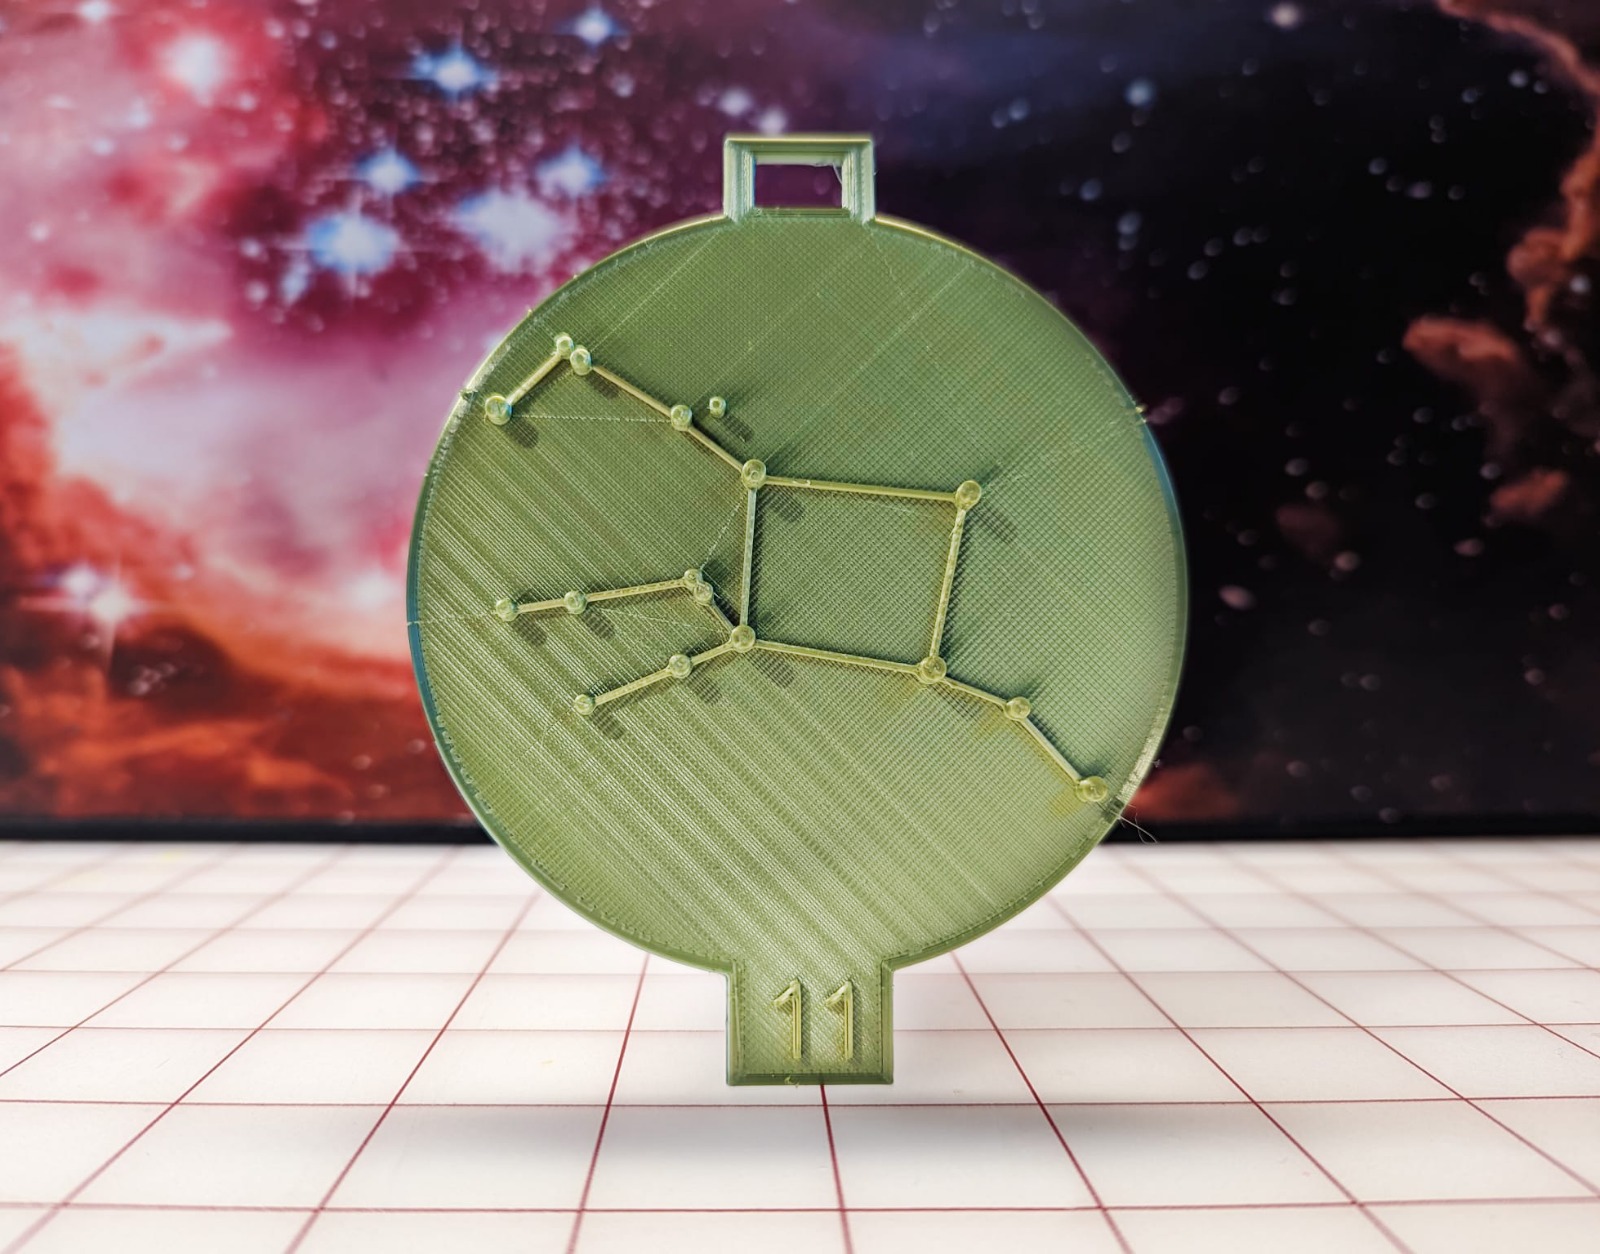 A 3D-printed map of the Pegasus constellation. Model by the Star Coin Project by Bruce Bream, CC BY-NC-SA 4.0.